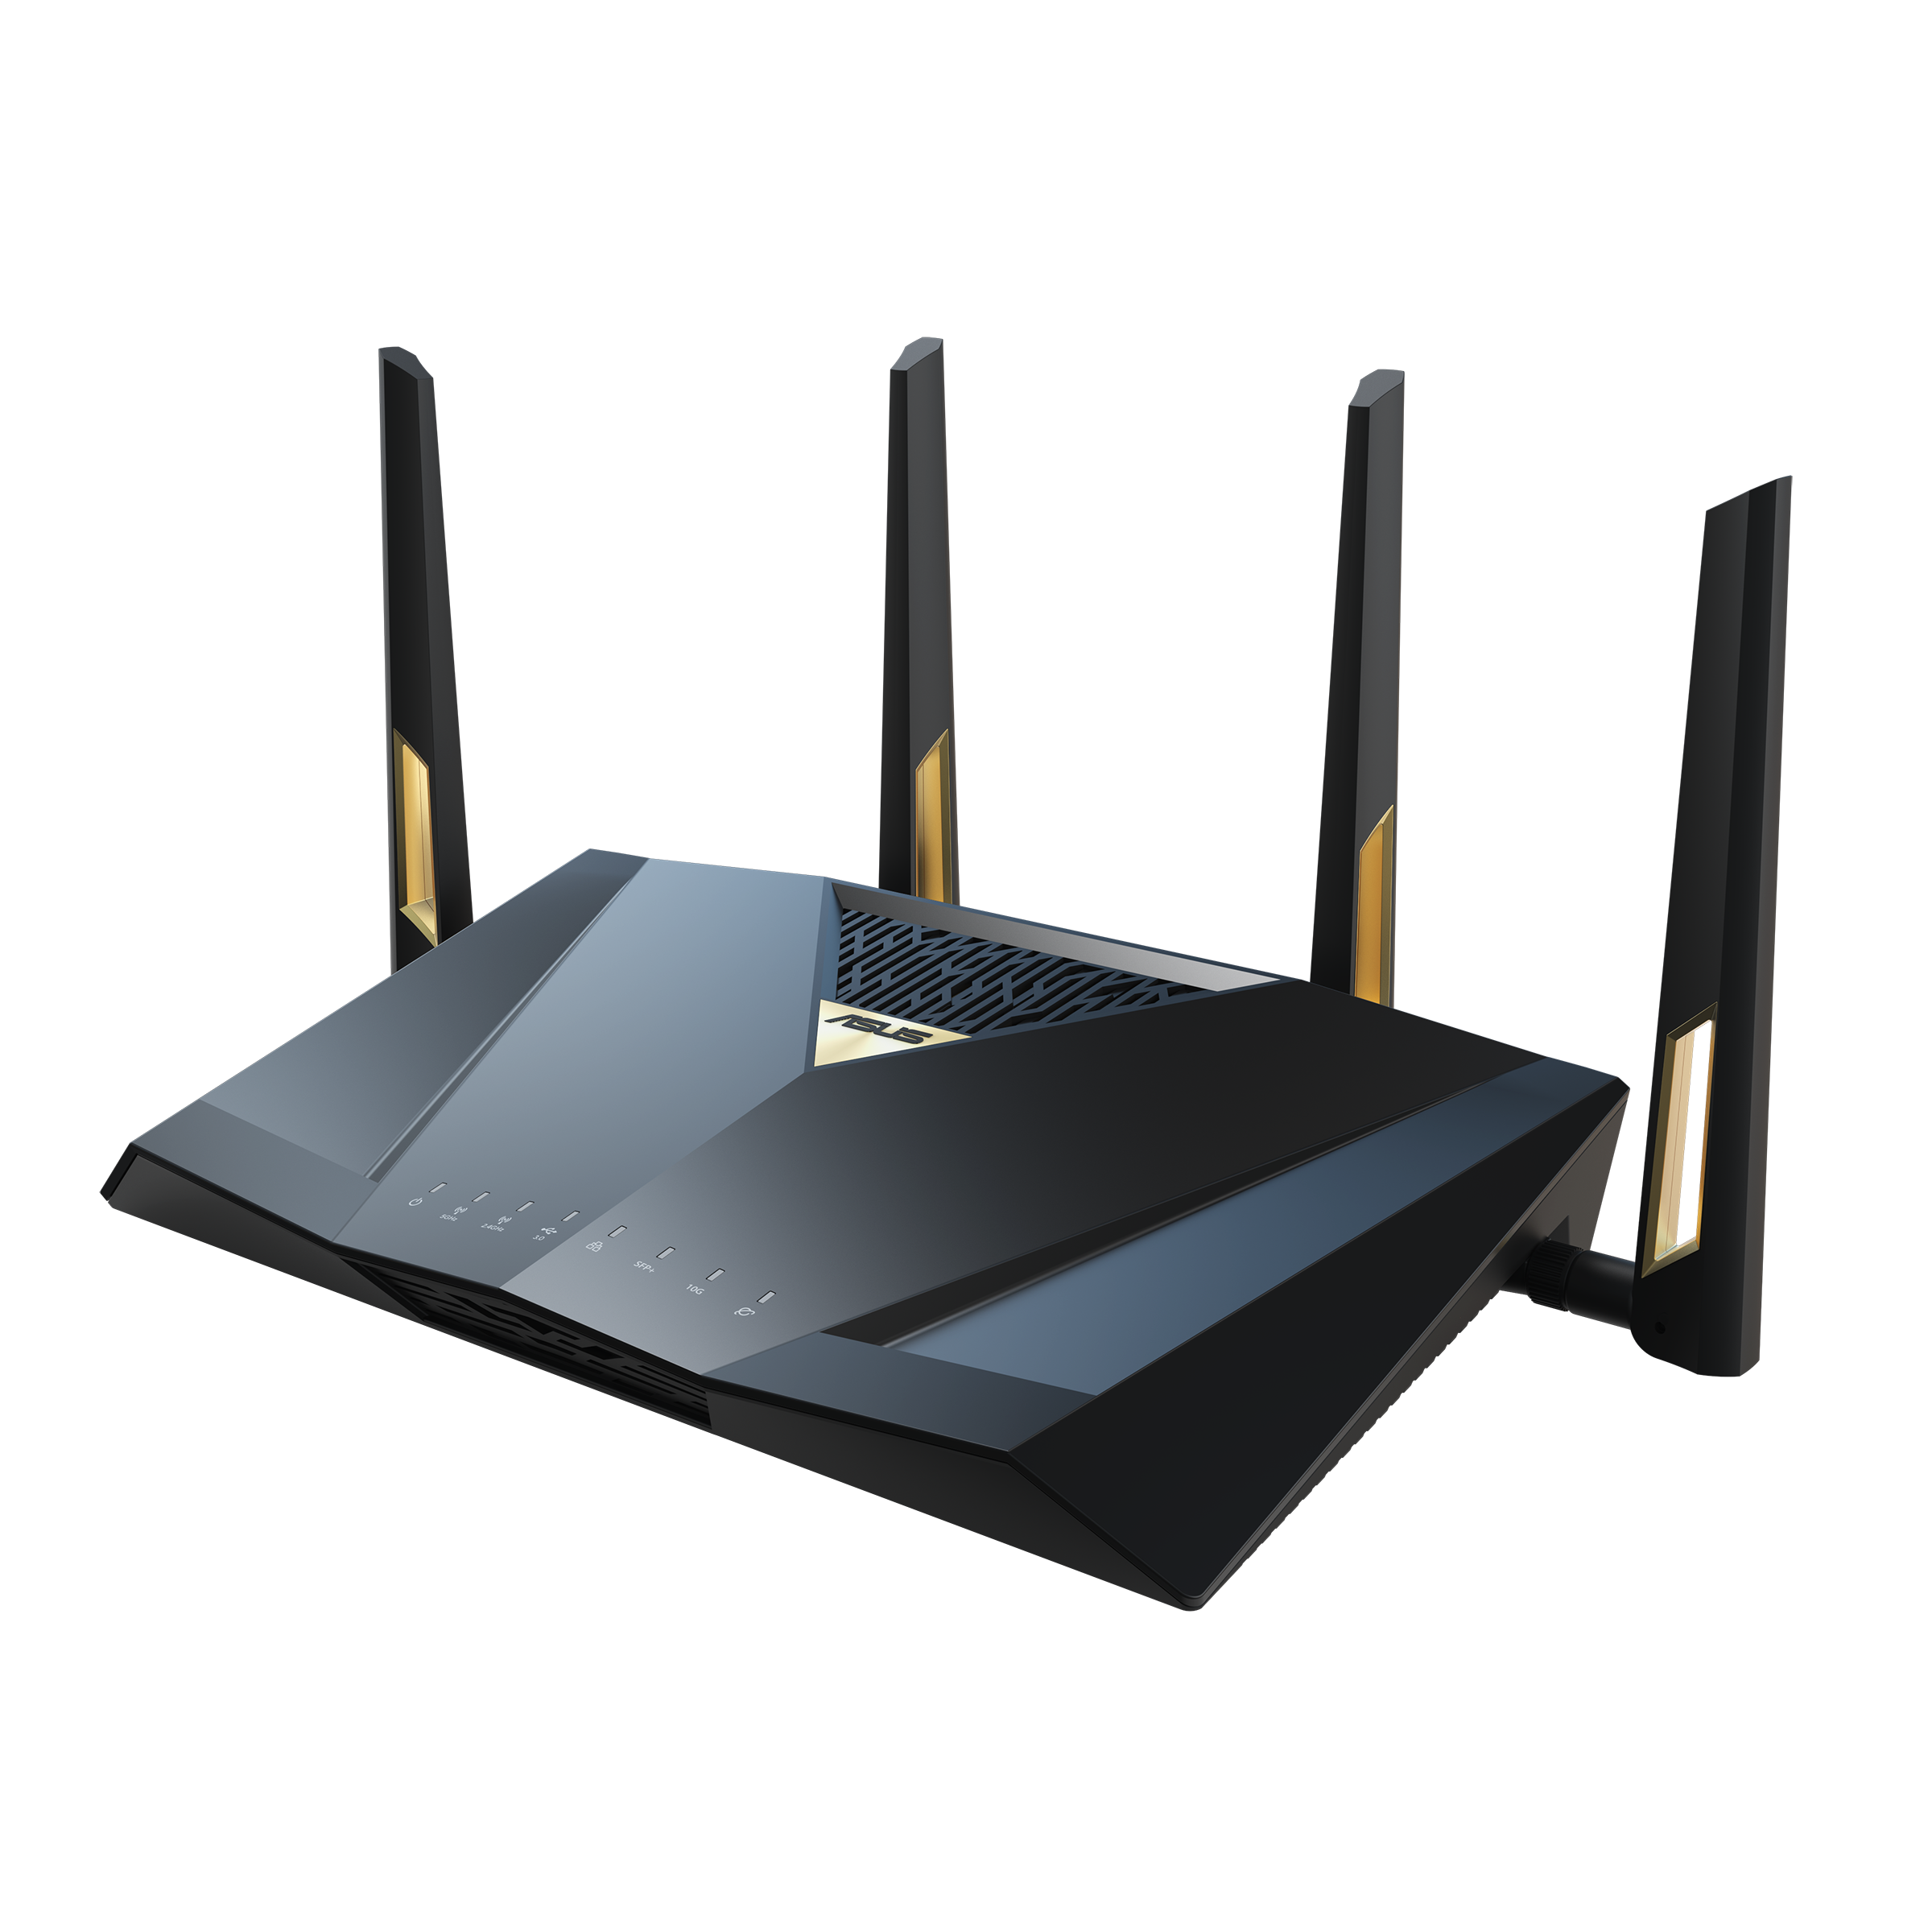 ASUS RT-BE88U Dual-band WiFi 7 AiMesh Extendable Performance Router